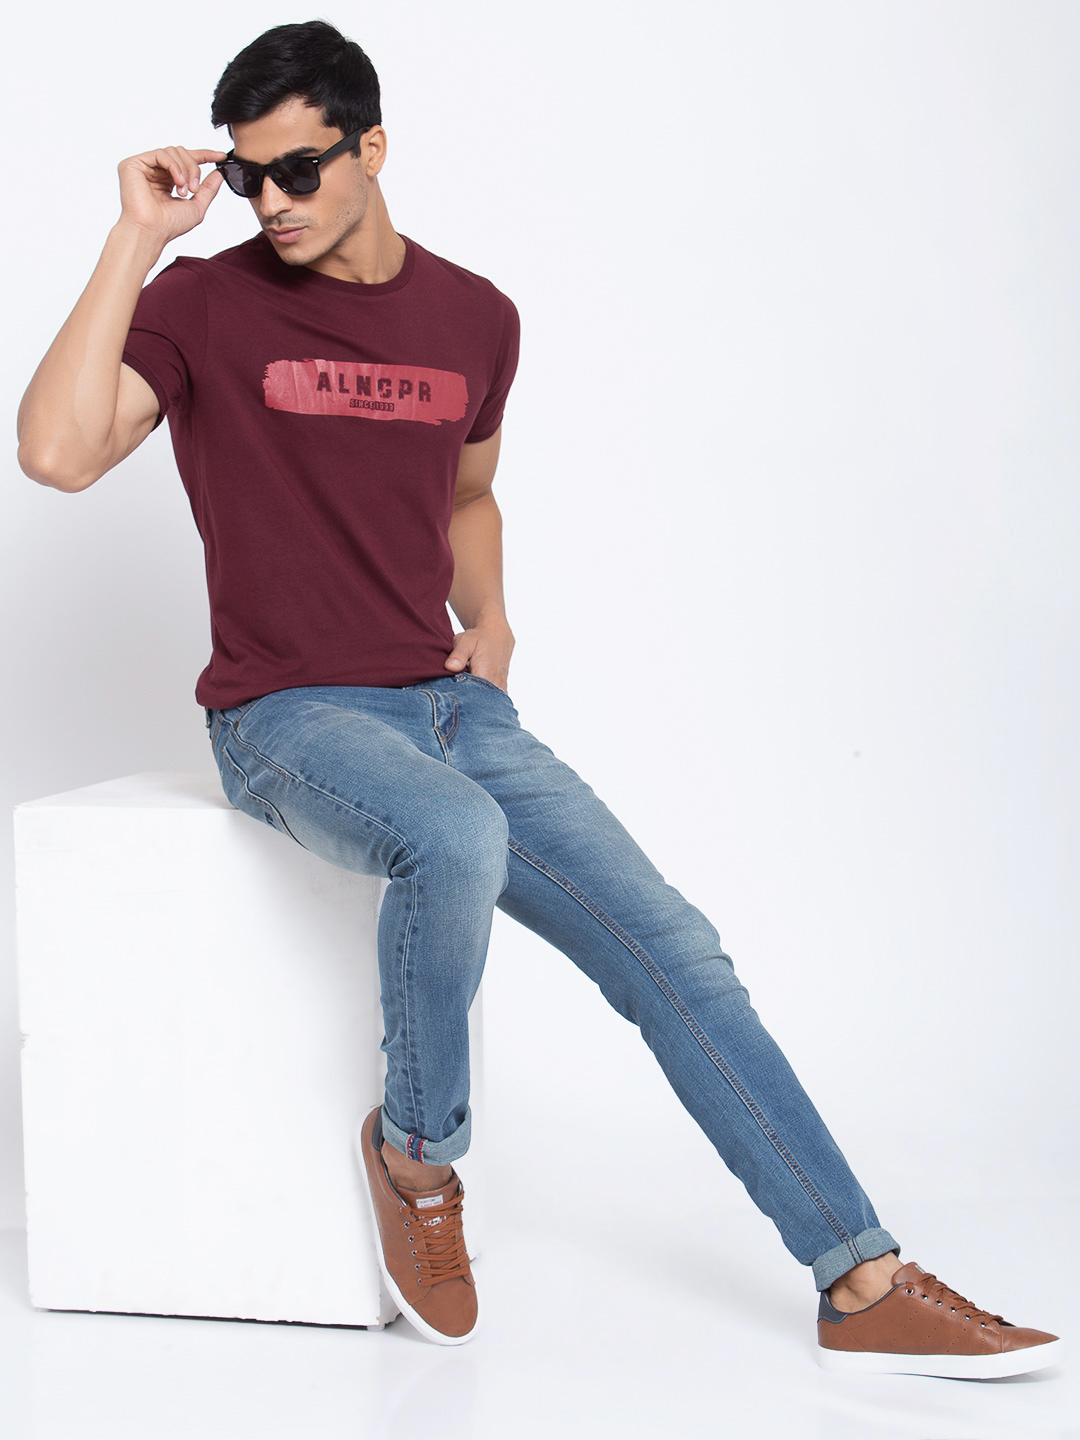 maroon t shirt outfit 20